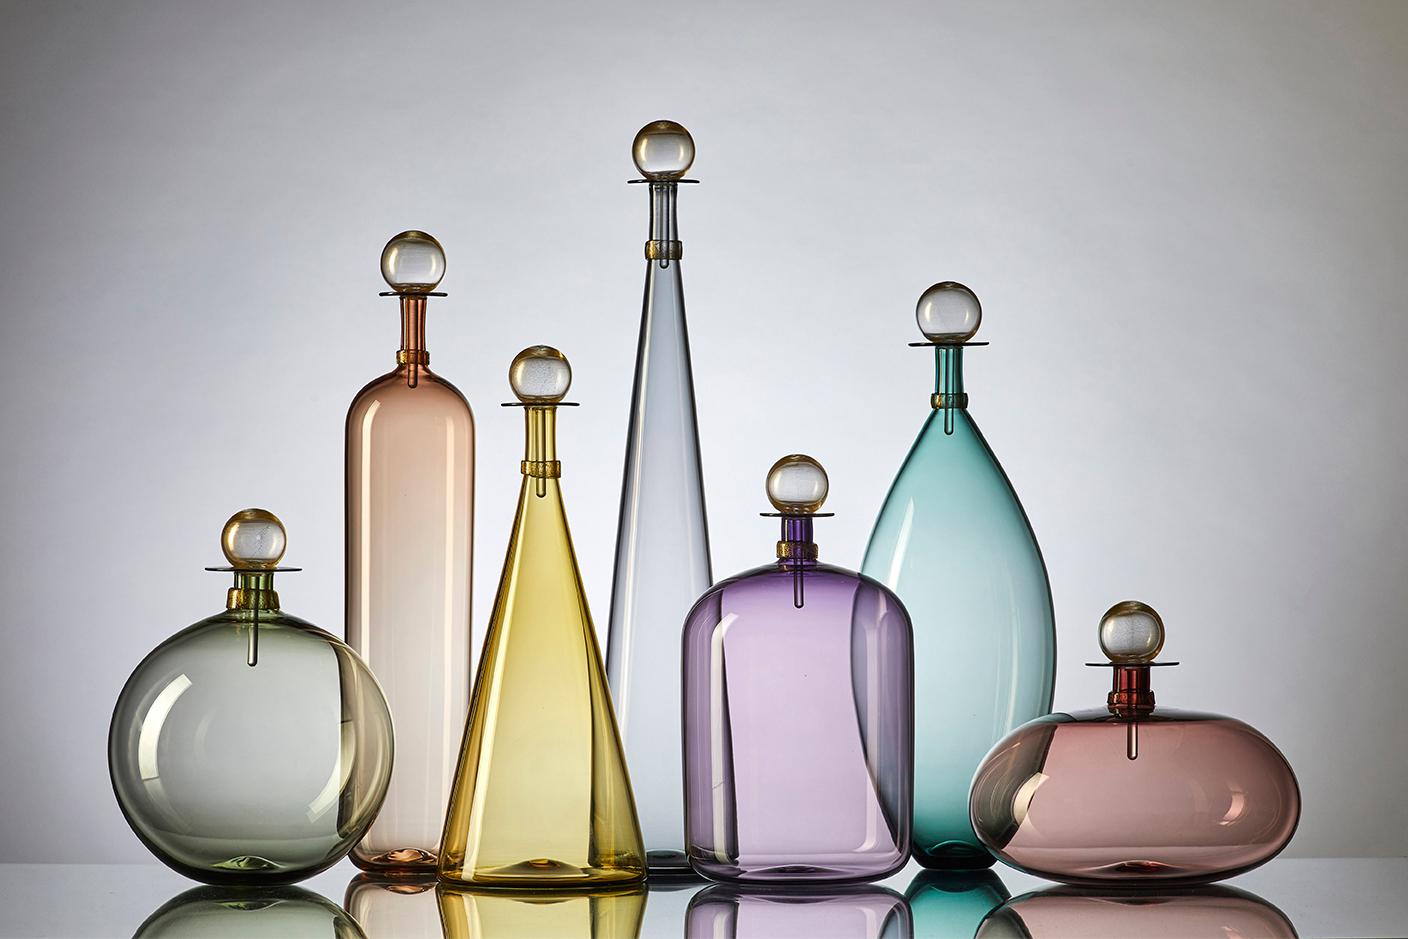 Contemporary Collection of 5 Large Hand Blown Glass Carafes in Smoke Colors by Vetro Vero